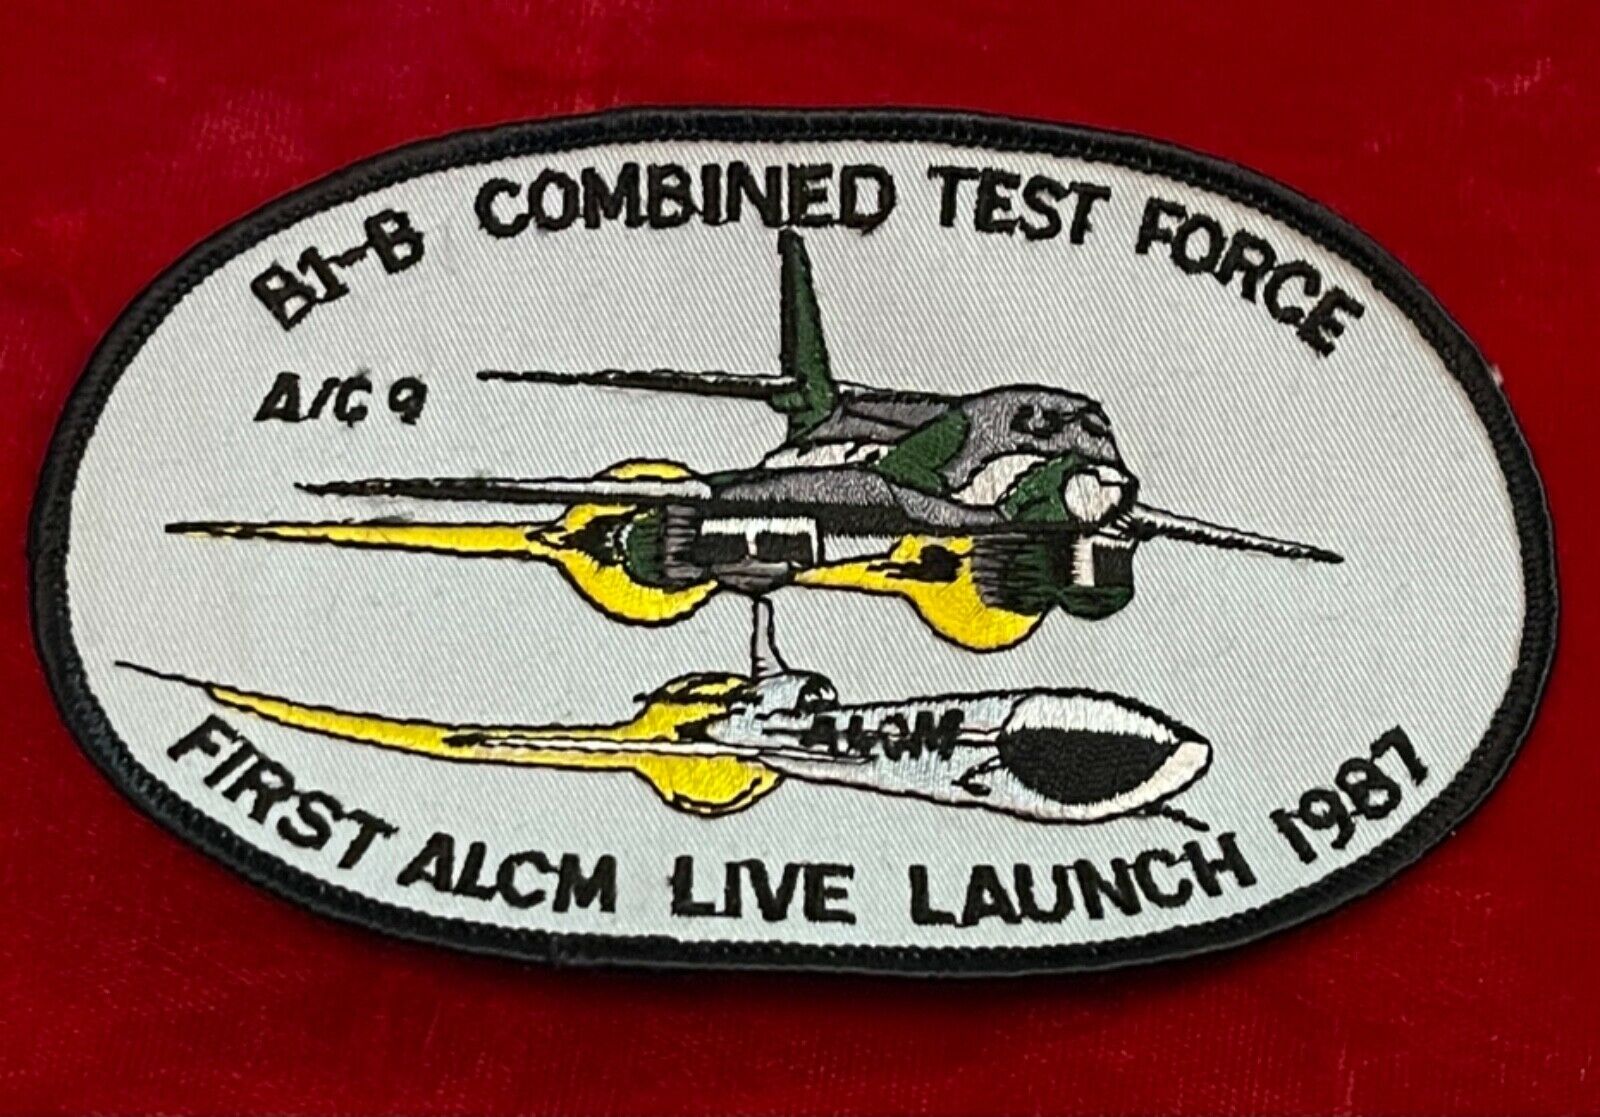 B1-b Combined Test Force A/c 9 First Alcm Live Launch 1987 B1 Bomber Patch